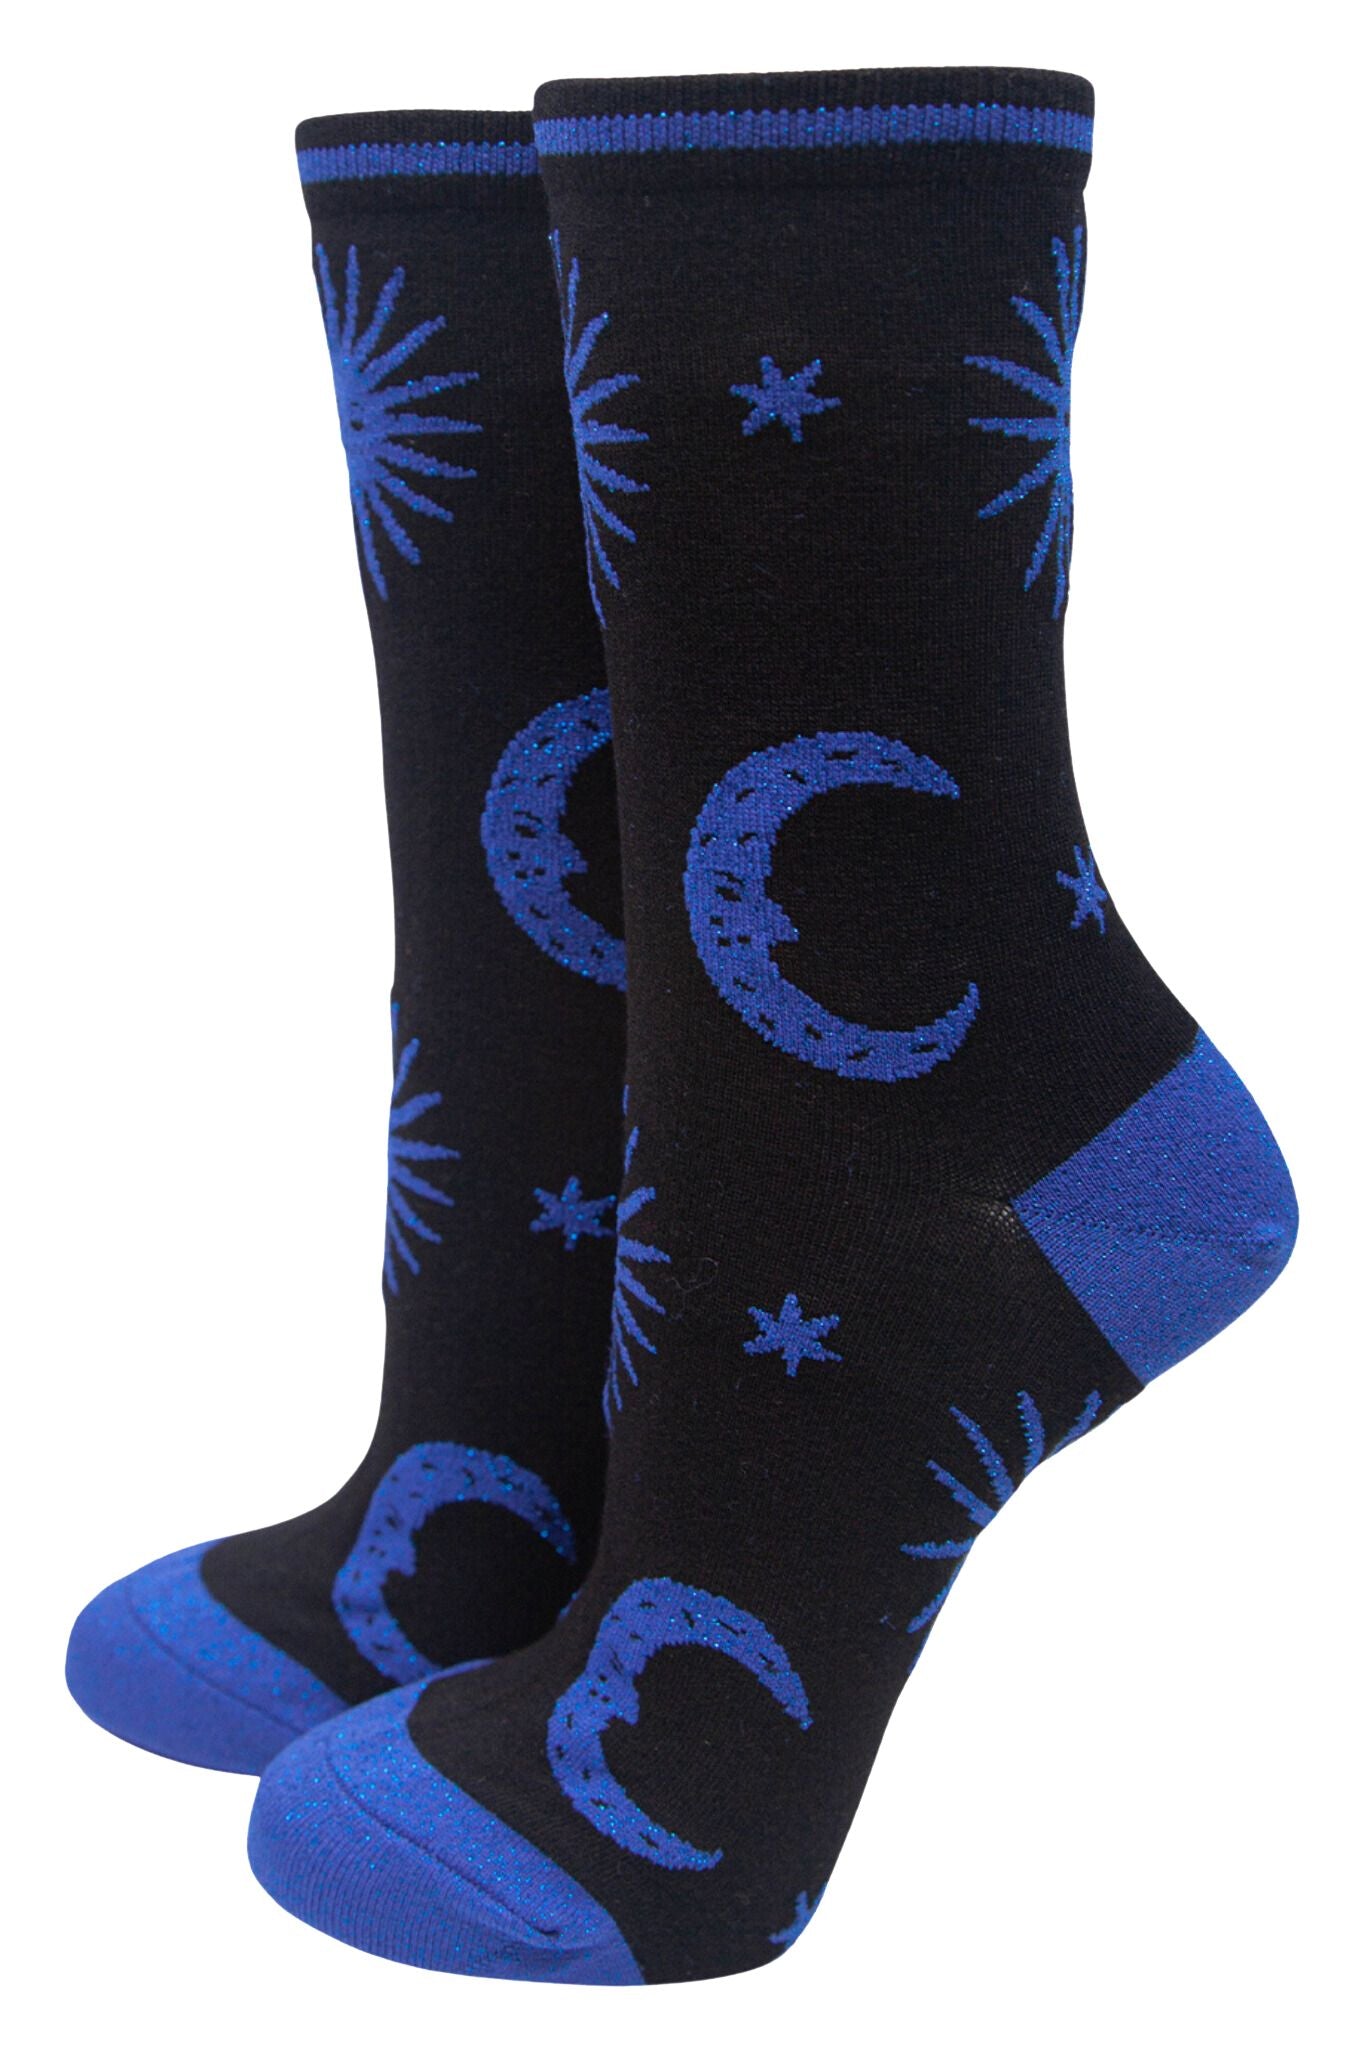 black bamboo ankle socks with a blue glitter star and moon pattern